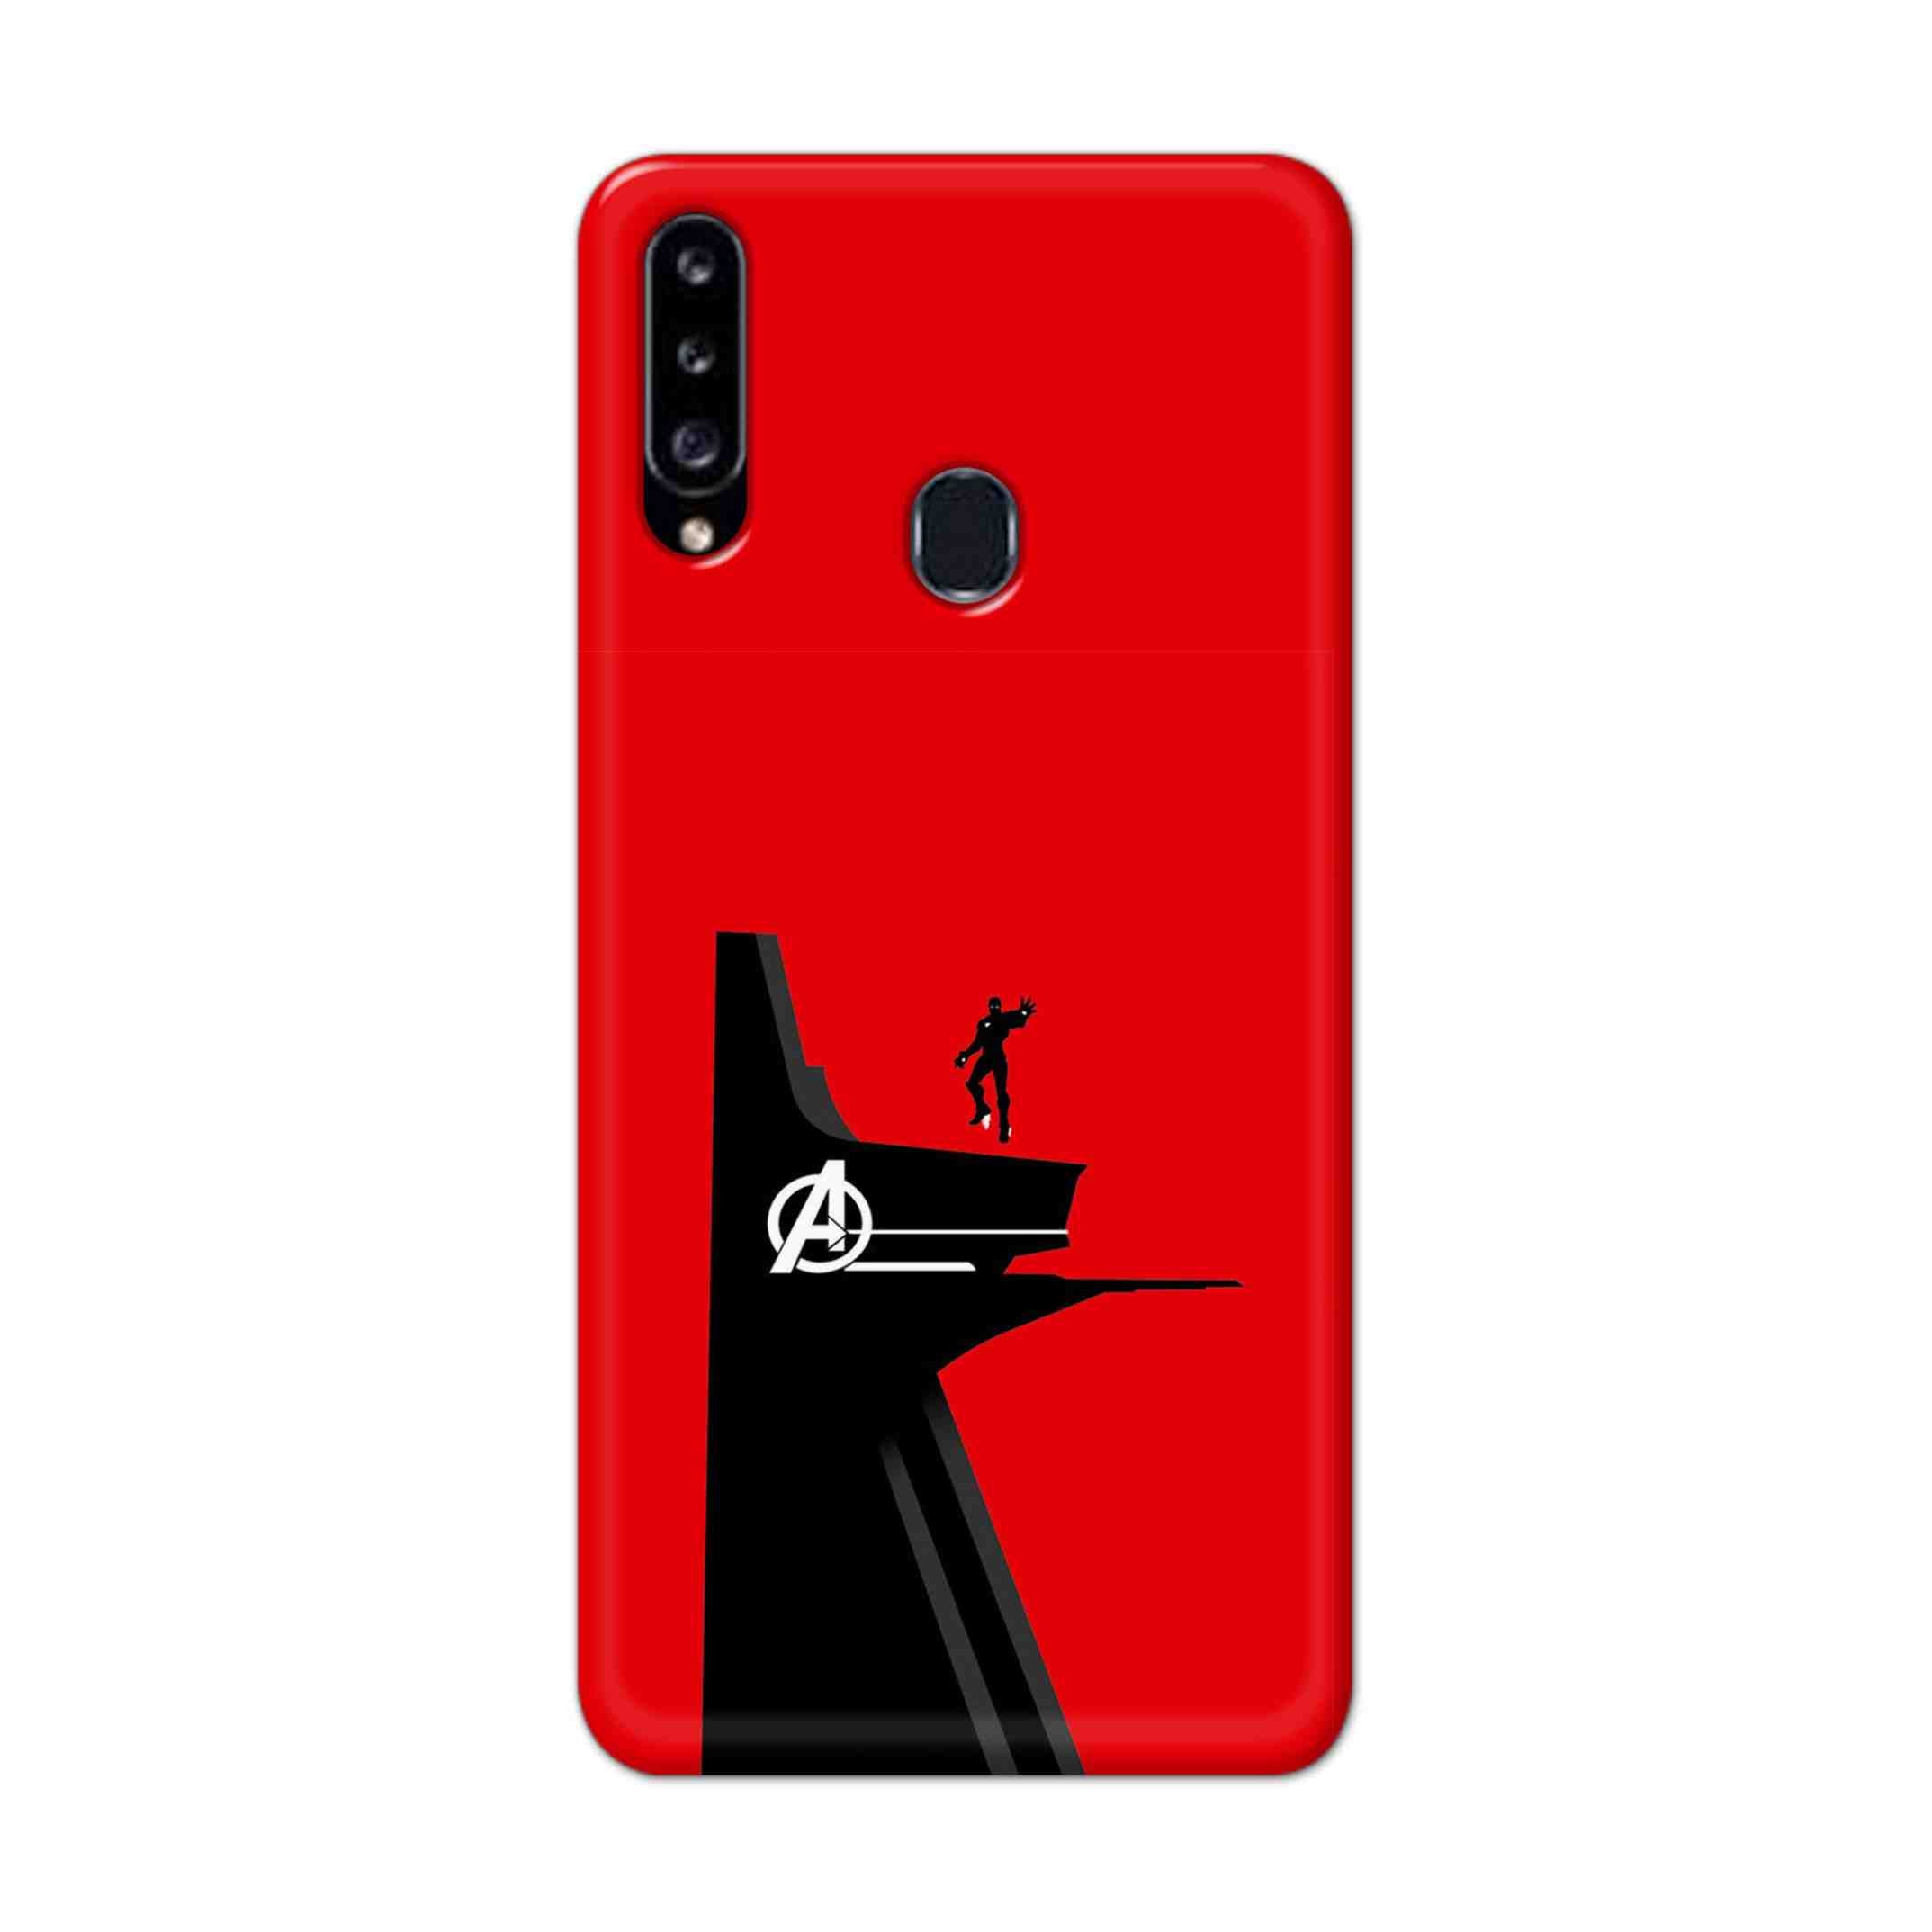 Buy Iron Man Hard Back Mobile Phone Case Cover For Samsung Galaxy A21 Online